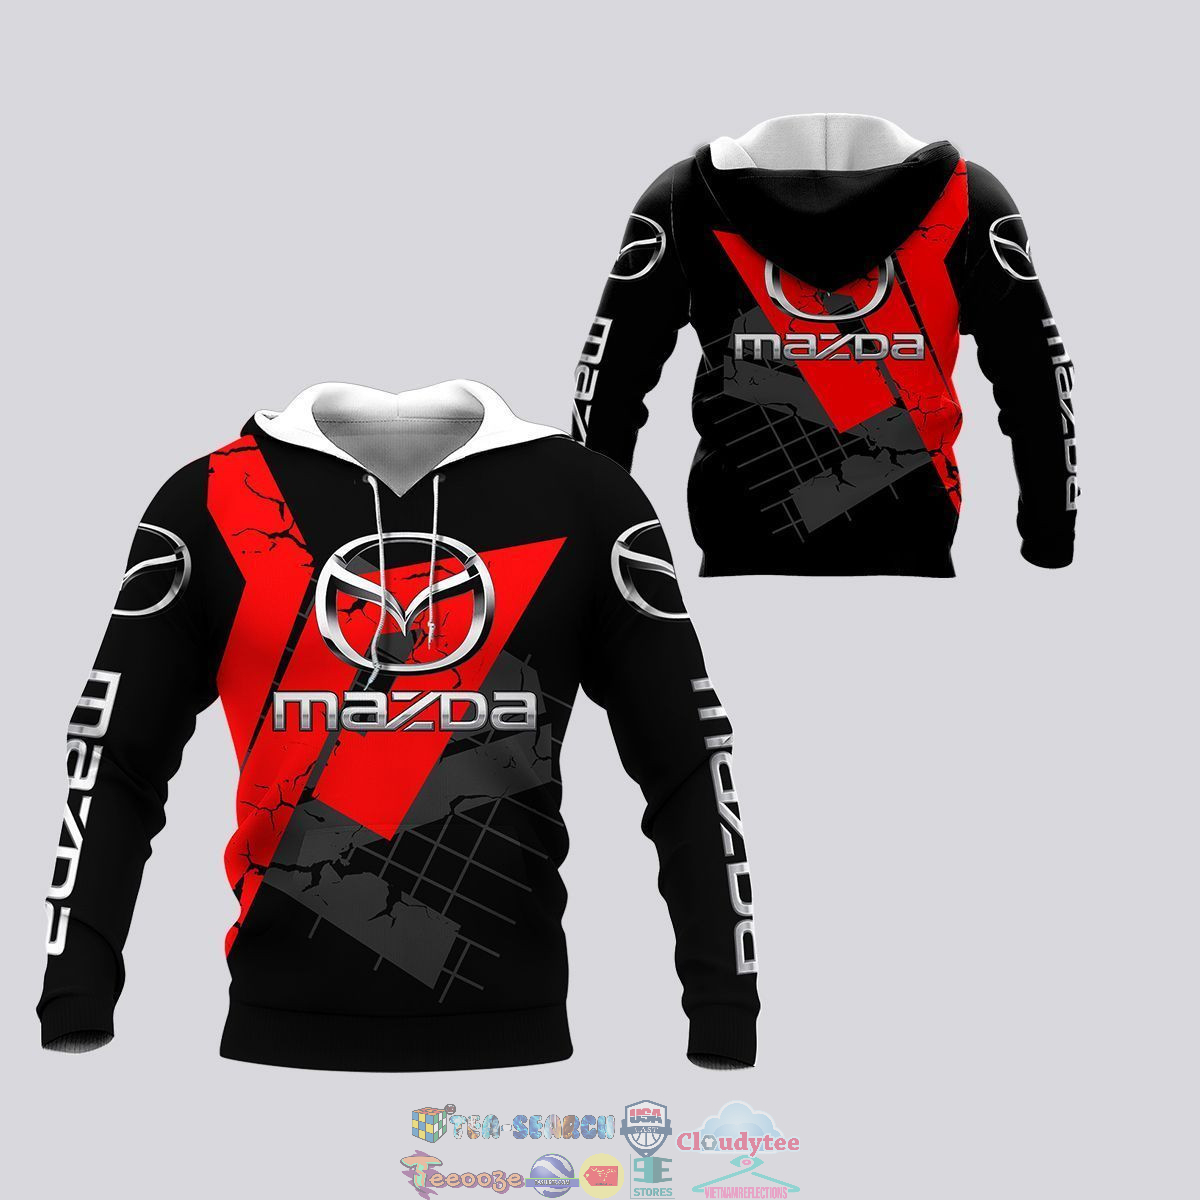 Mazda ver 15 3D hoodie and t-shirt